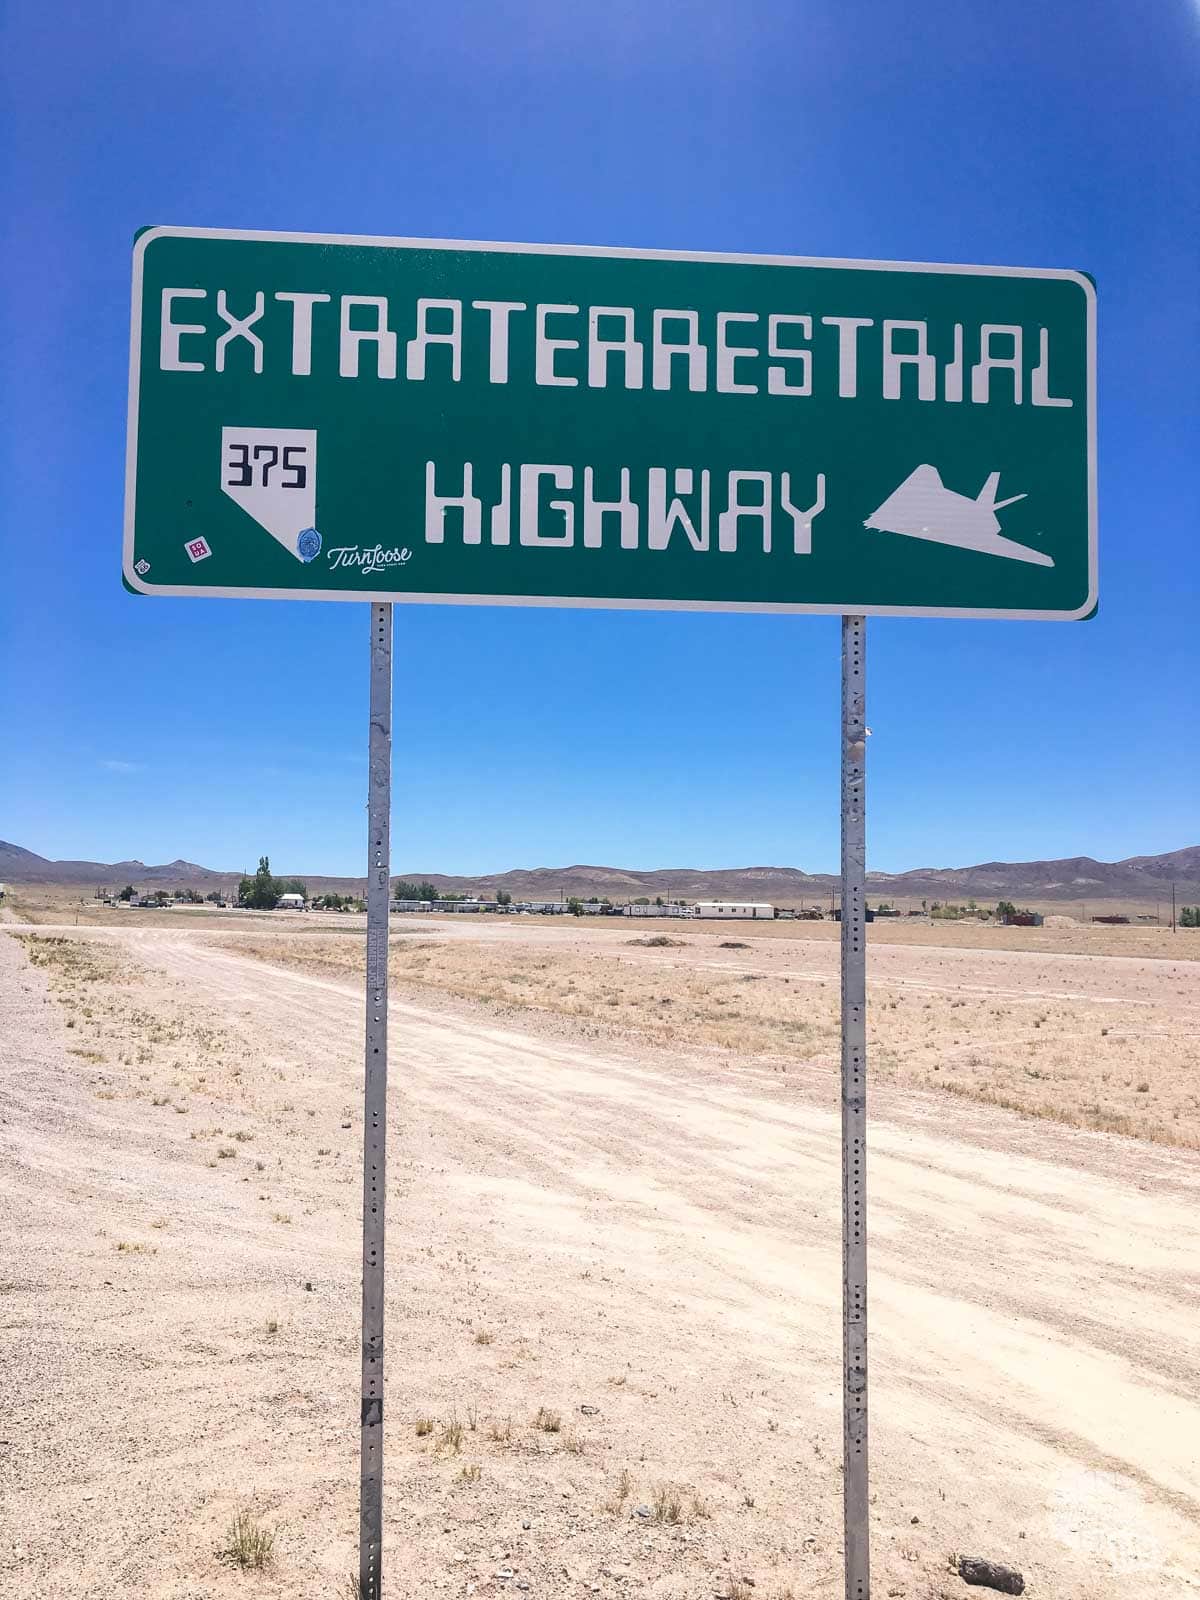 A green road sign in the midst of the desert labled the Extraterrestrial Highway in unusual script, with a silhouette of an Air Force Stealth Fighter on it.